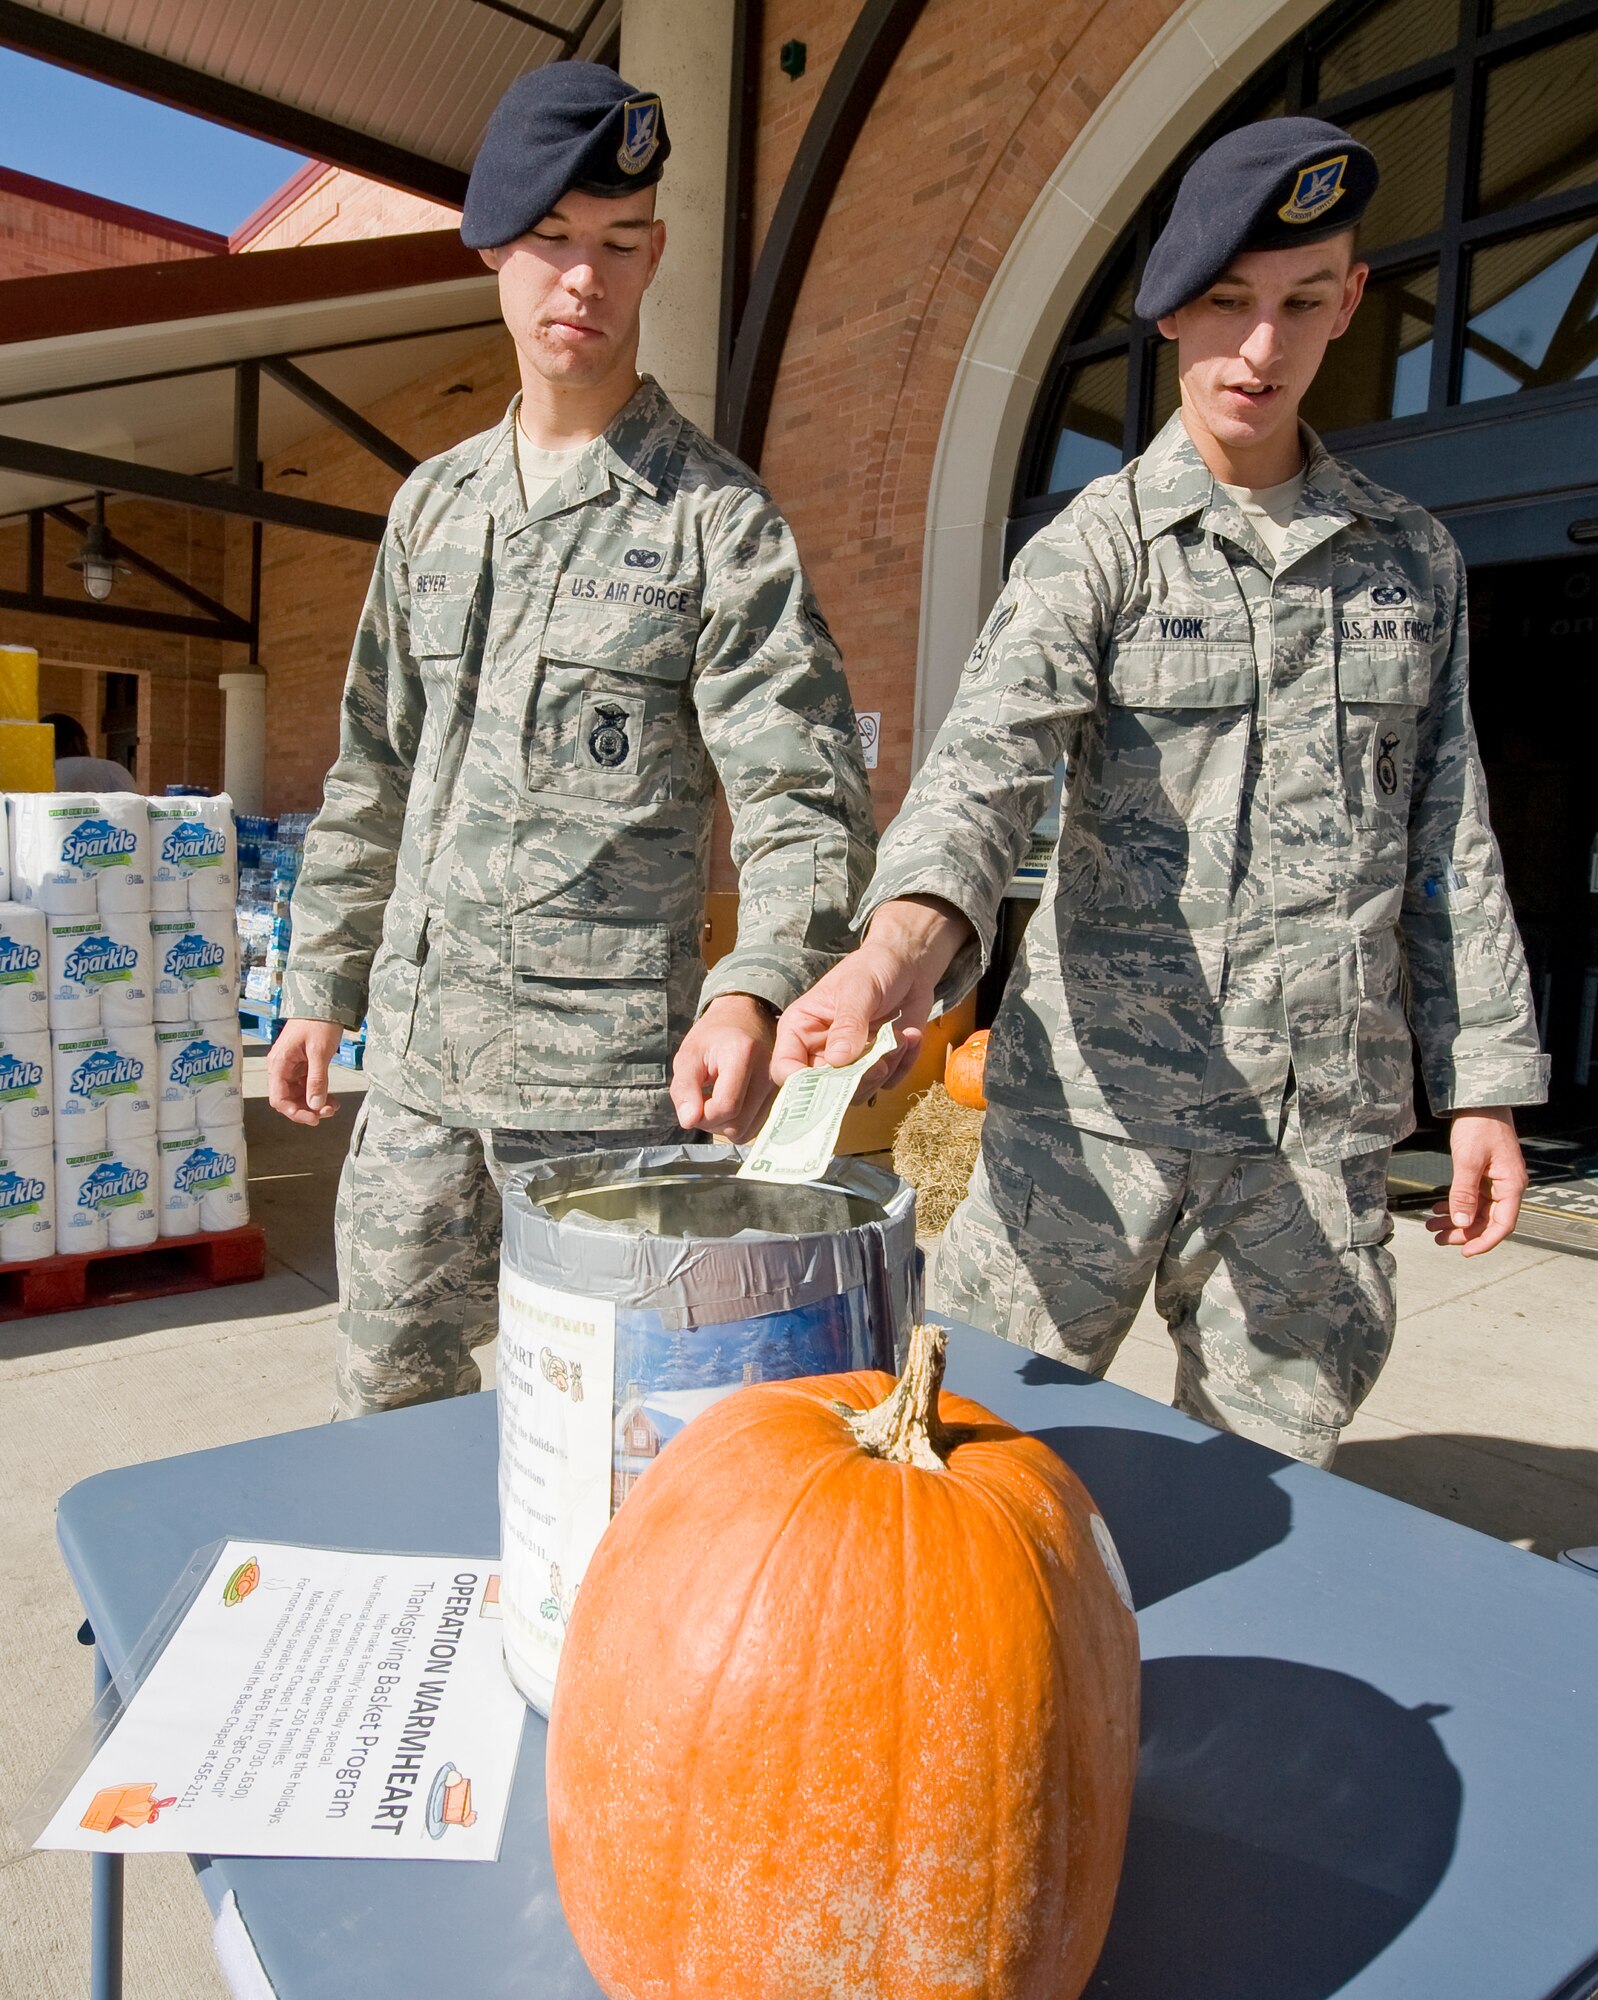 BARKSDALE AIR FORCE BASE, La. -- Two security forces Airmen donate money to Operation Warmheart outside the Commissary Oct. 6. Operation Warmheart is a program that provides for Airmen and their families who may need financial help during the holidays. (U.S. Air Force photo/Senior Airman Chad Warren)